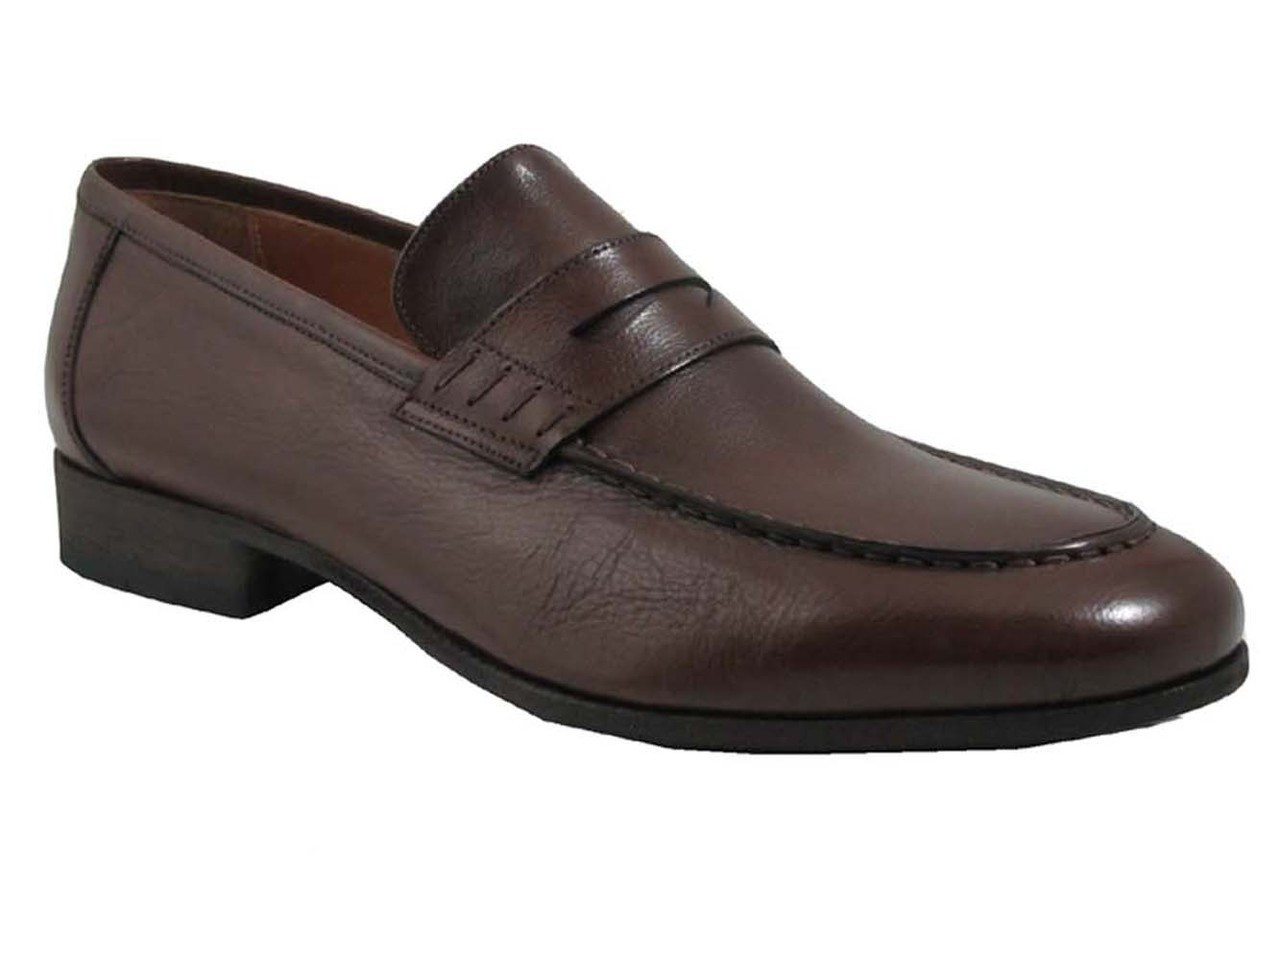 Rossi Italian Leather 1876 Penny Shoes